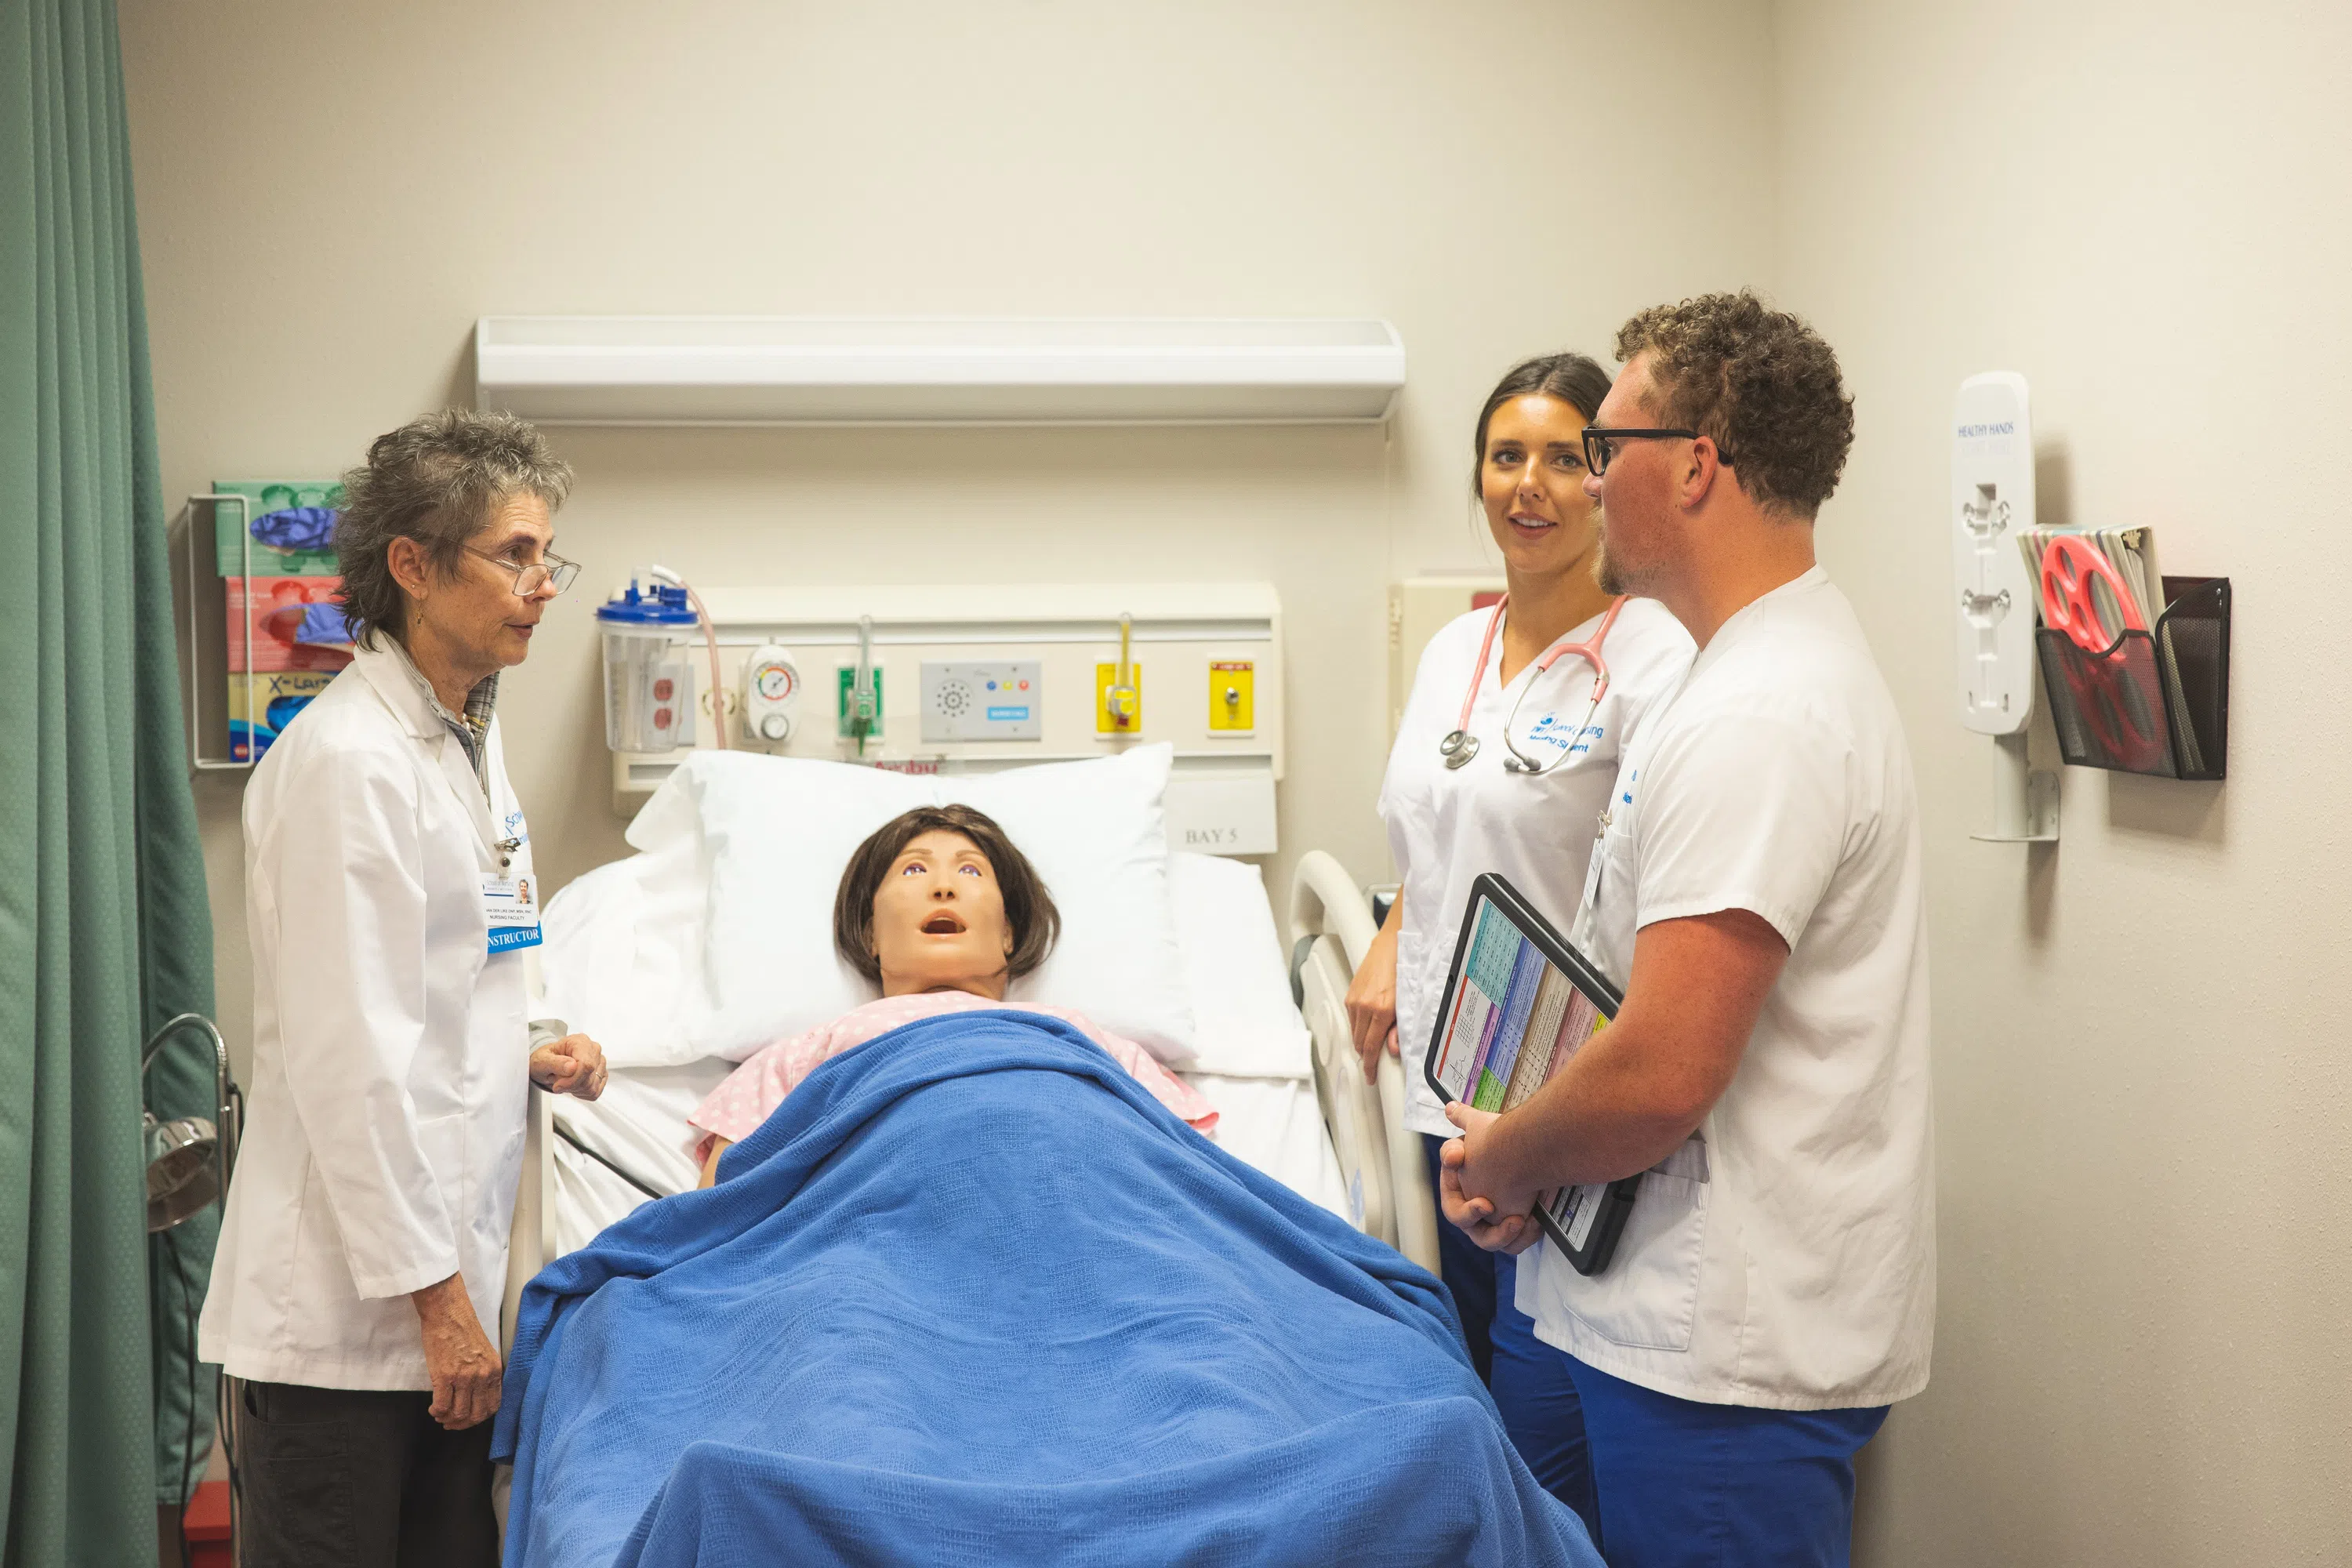 Nursing students interact with simulated patient.